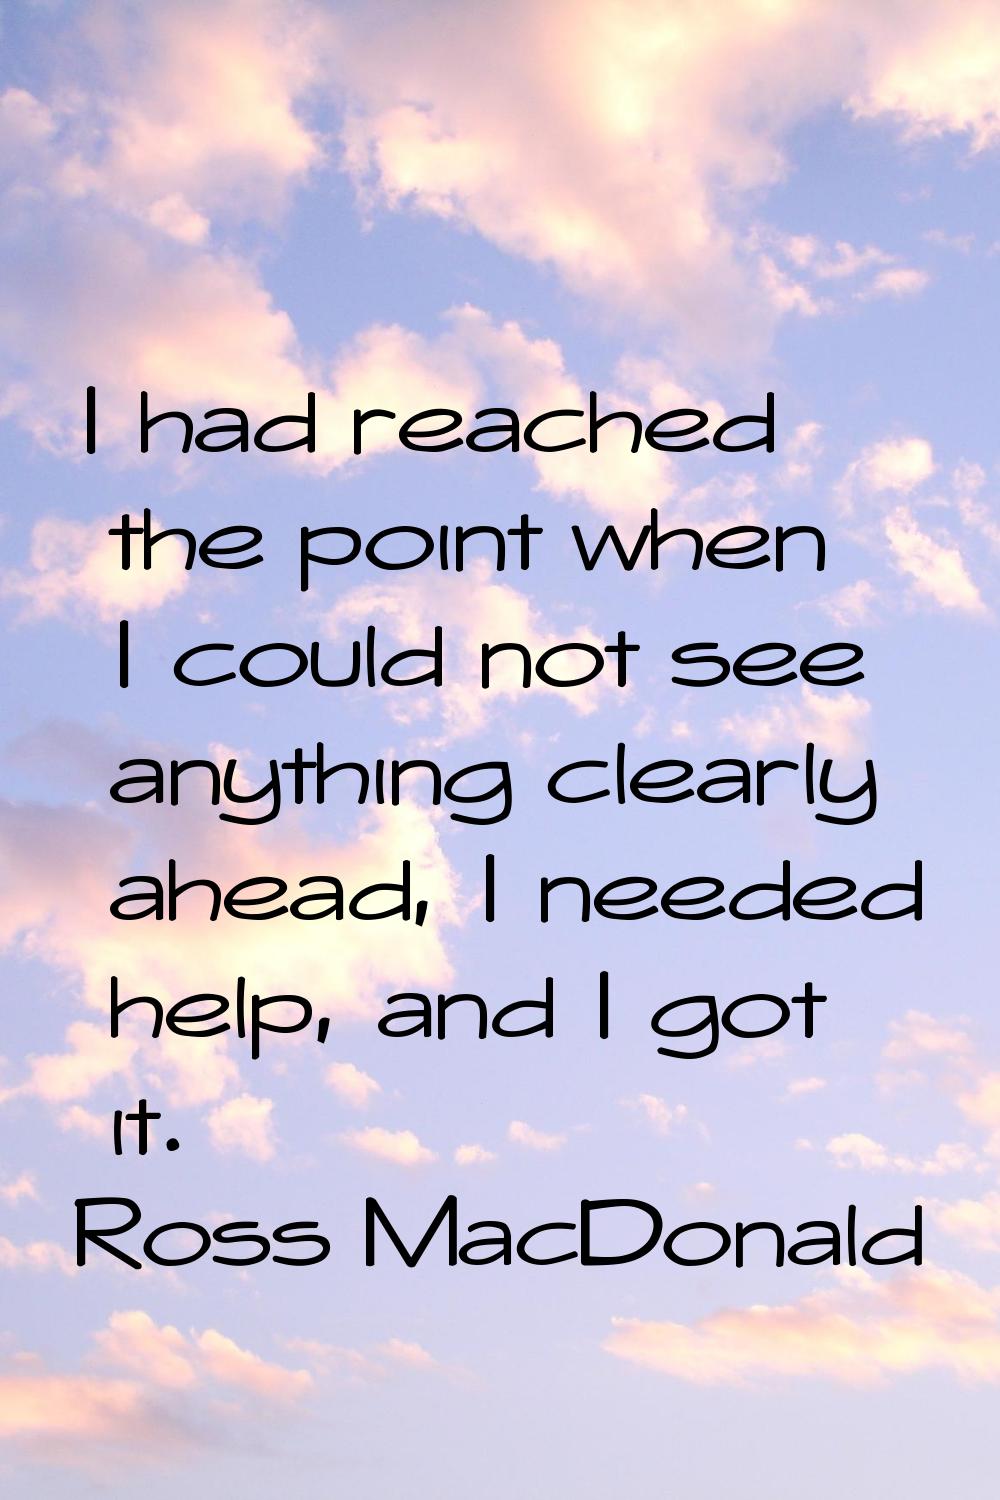 I had reached the point when I could not see anything clearly ahead, I needed help, and I got it.